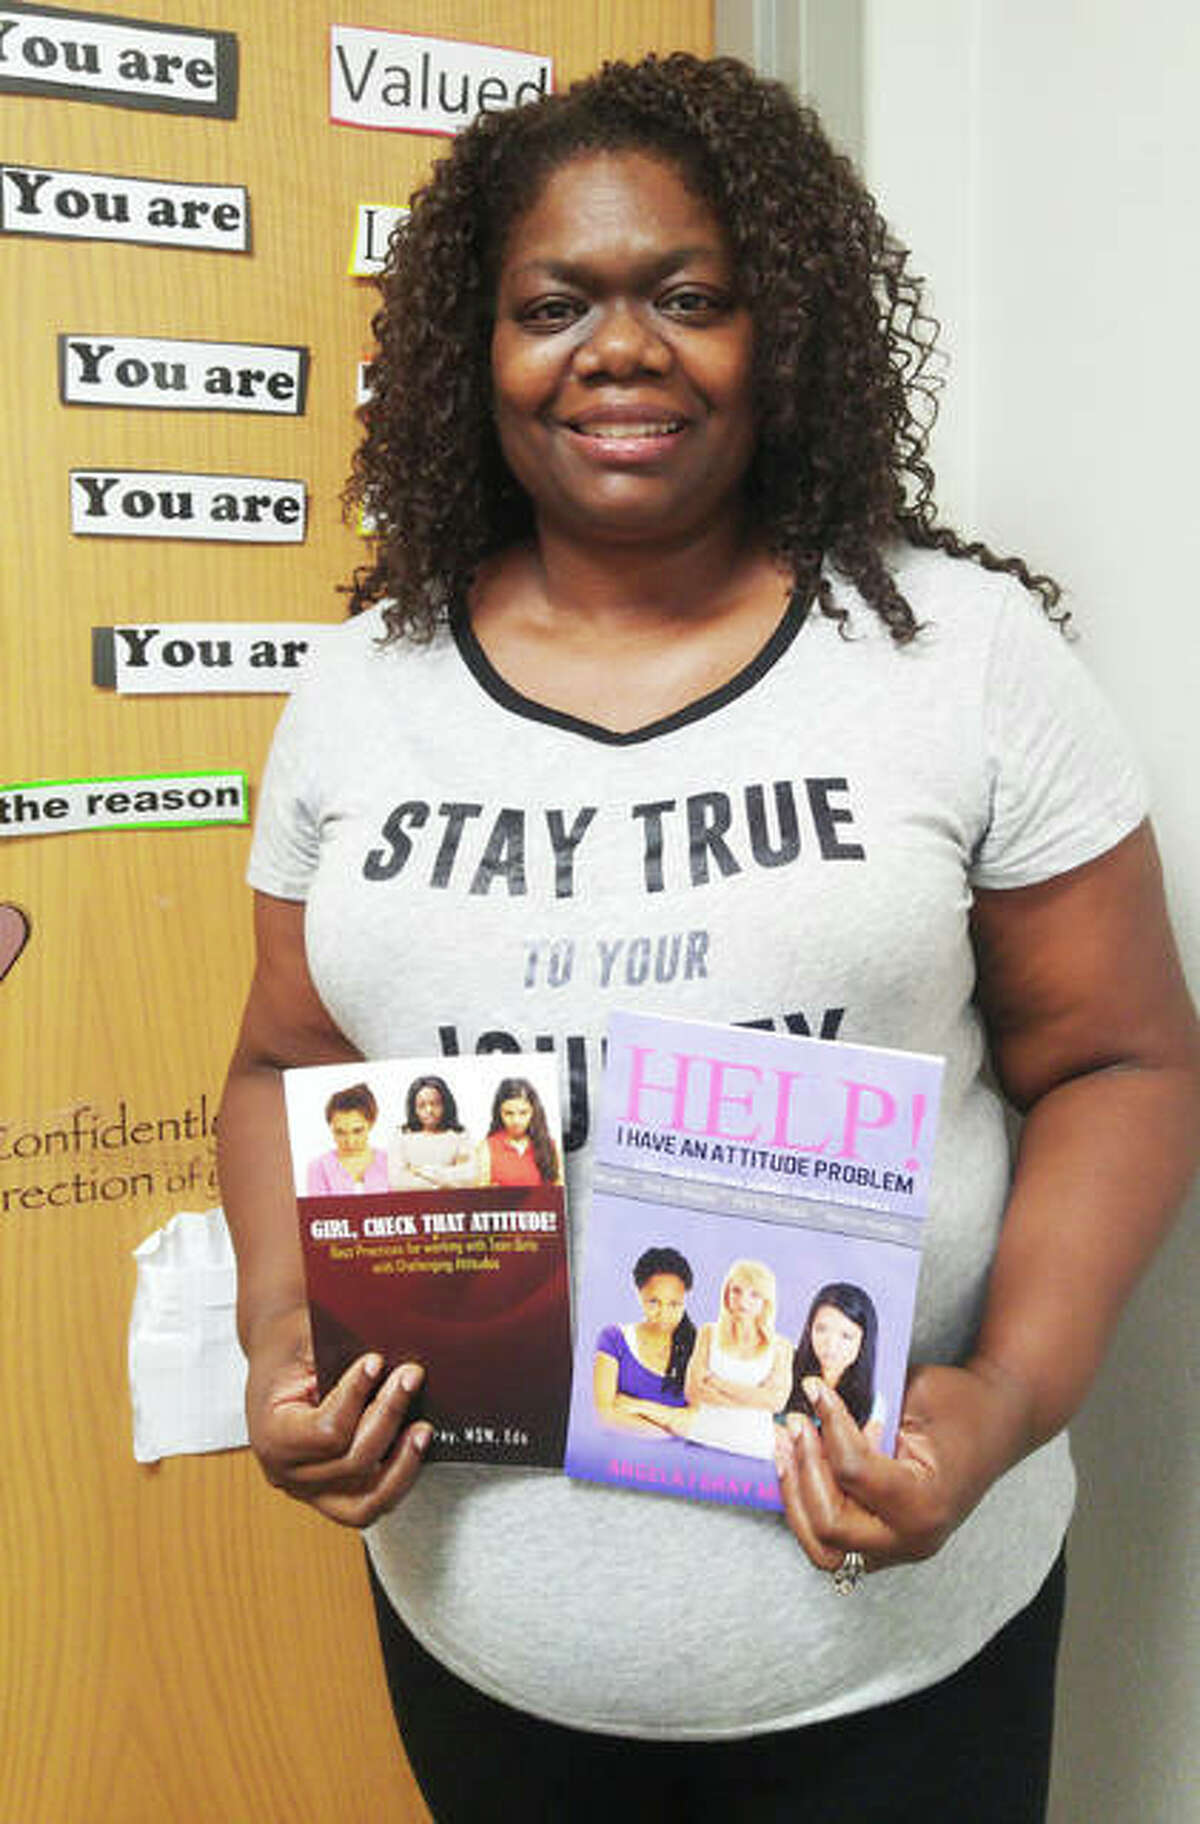 Angela Gray, a social worker at Alton High School for 17 years, finished her second book last month addressing anger issues and attitude problems among young girls.